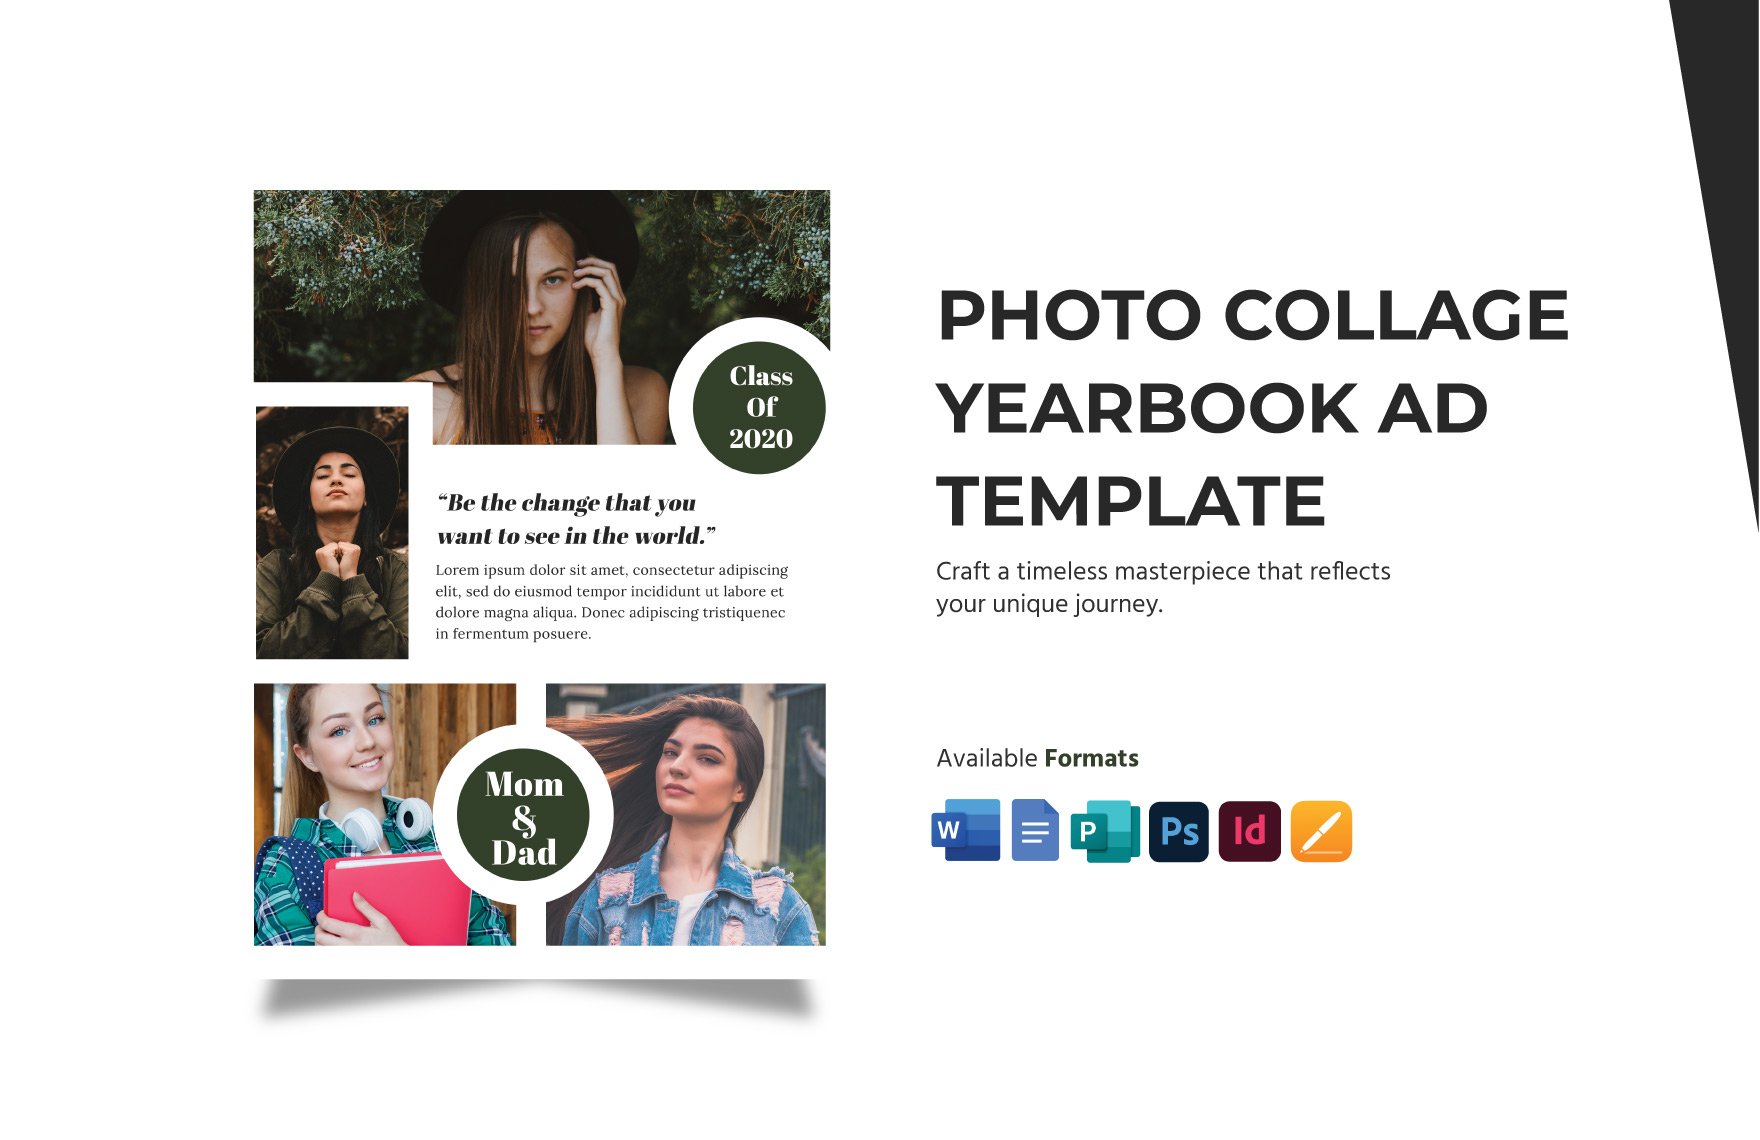 Photo Collage Yearbook Ad Template